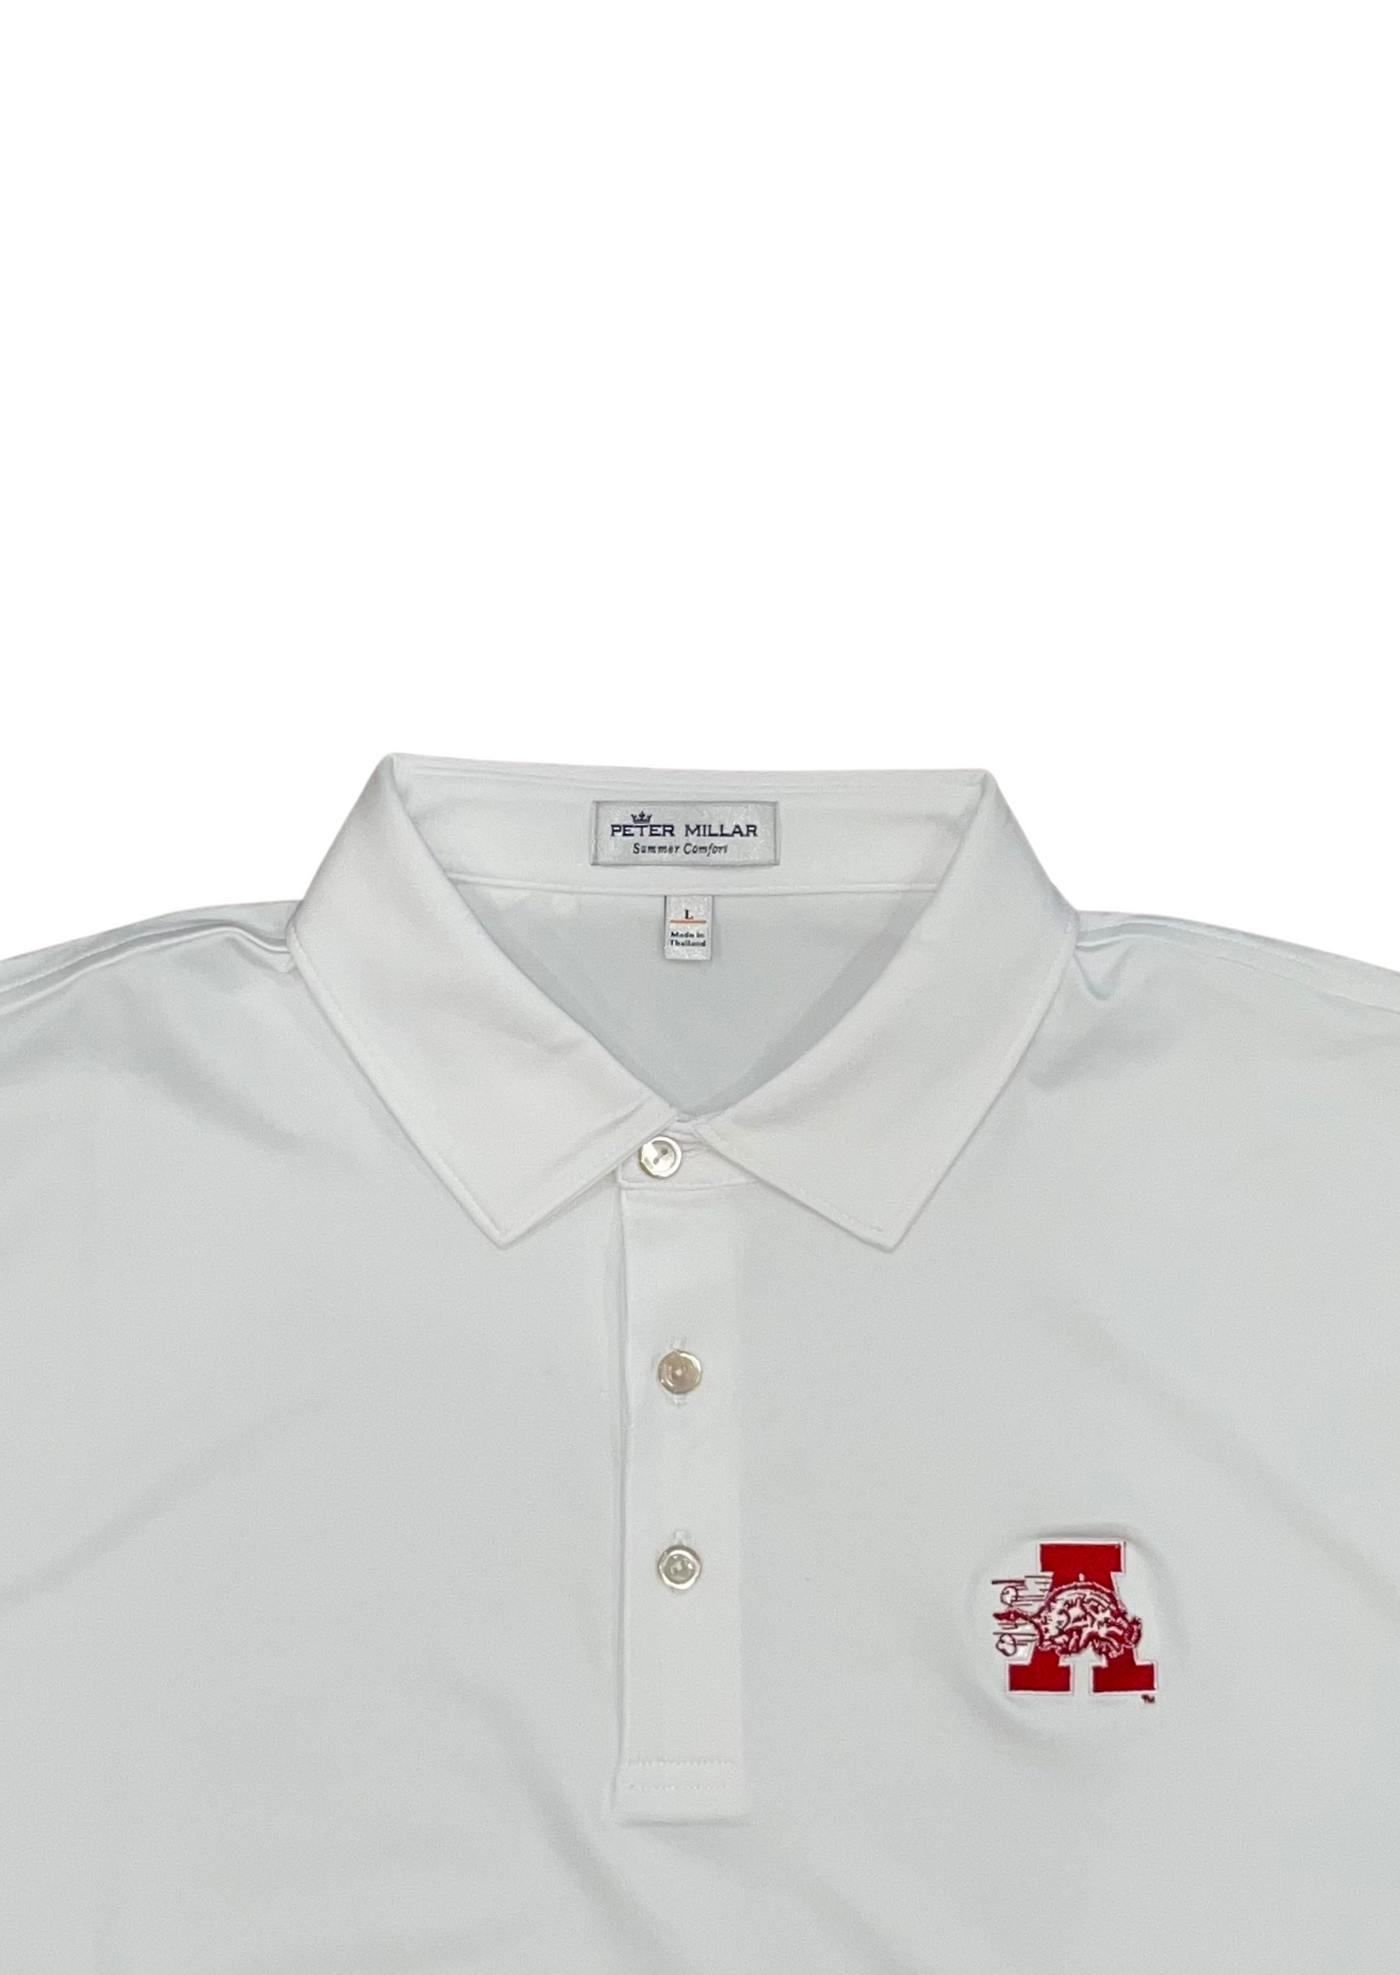 Hog on A Solid Performance Jersey Polo